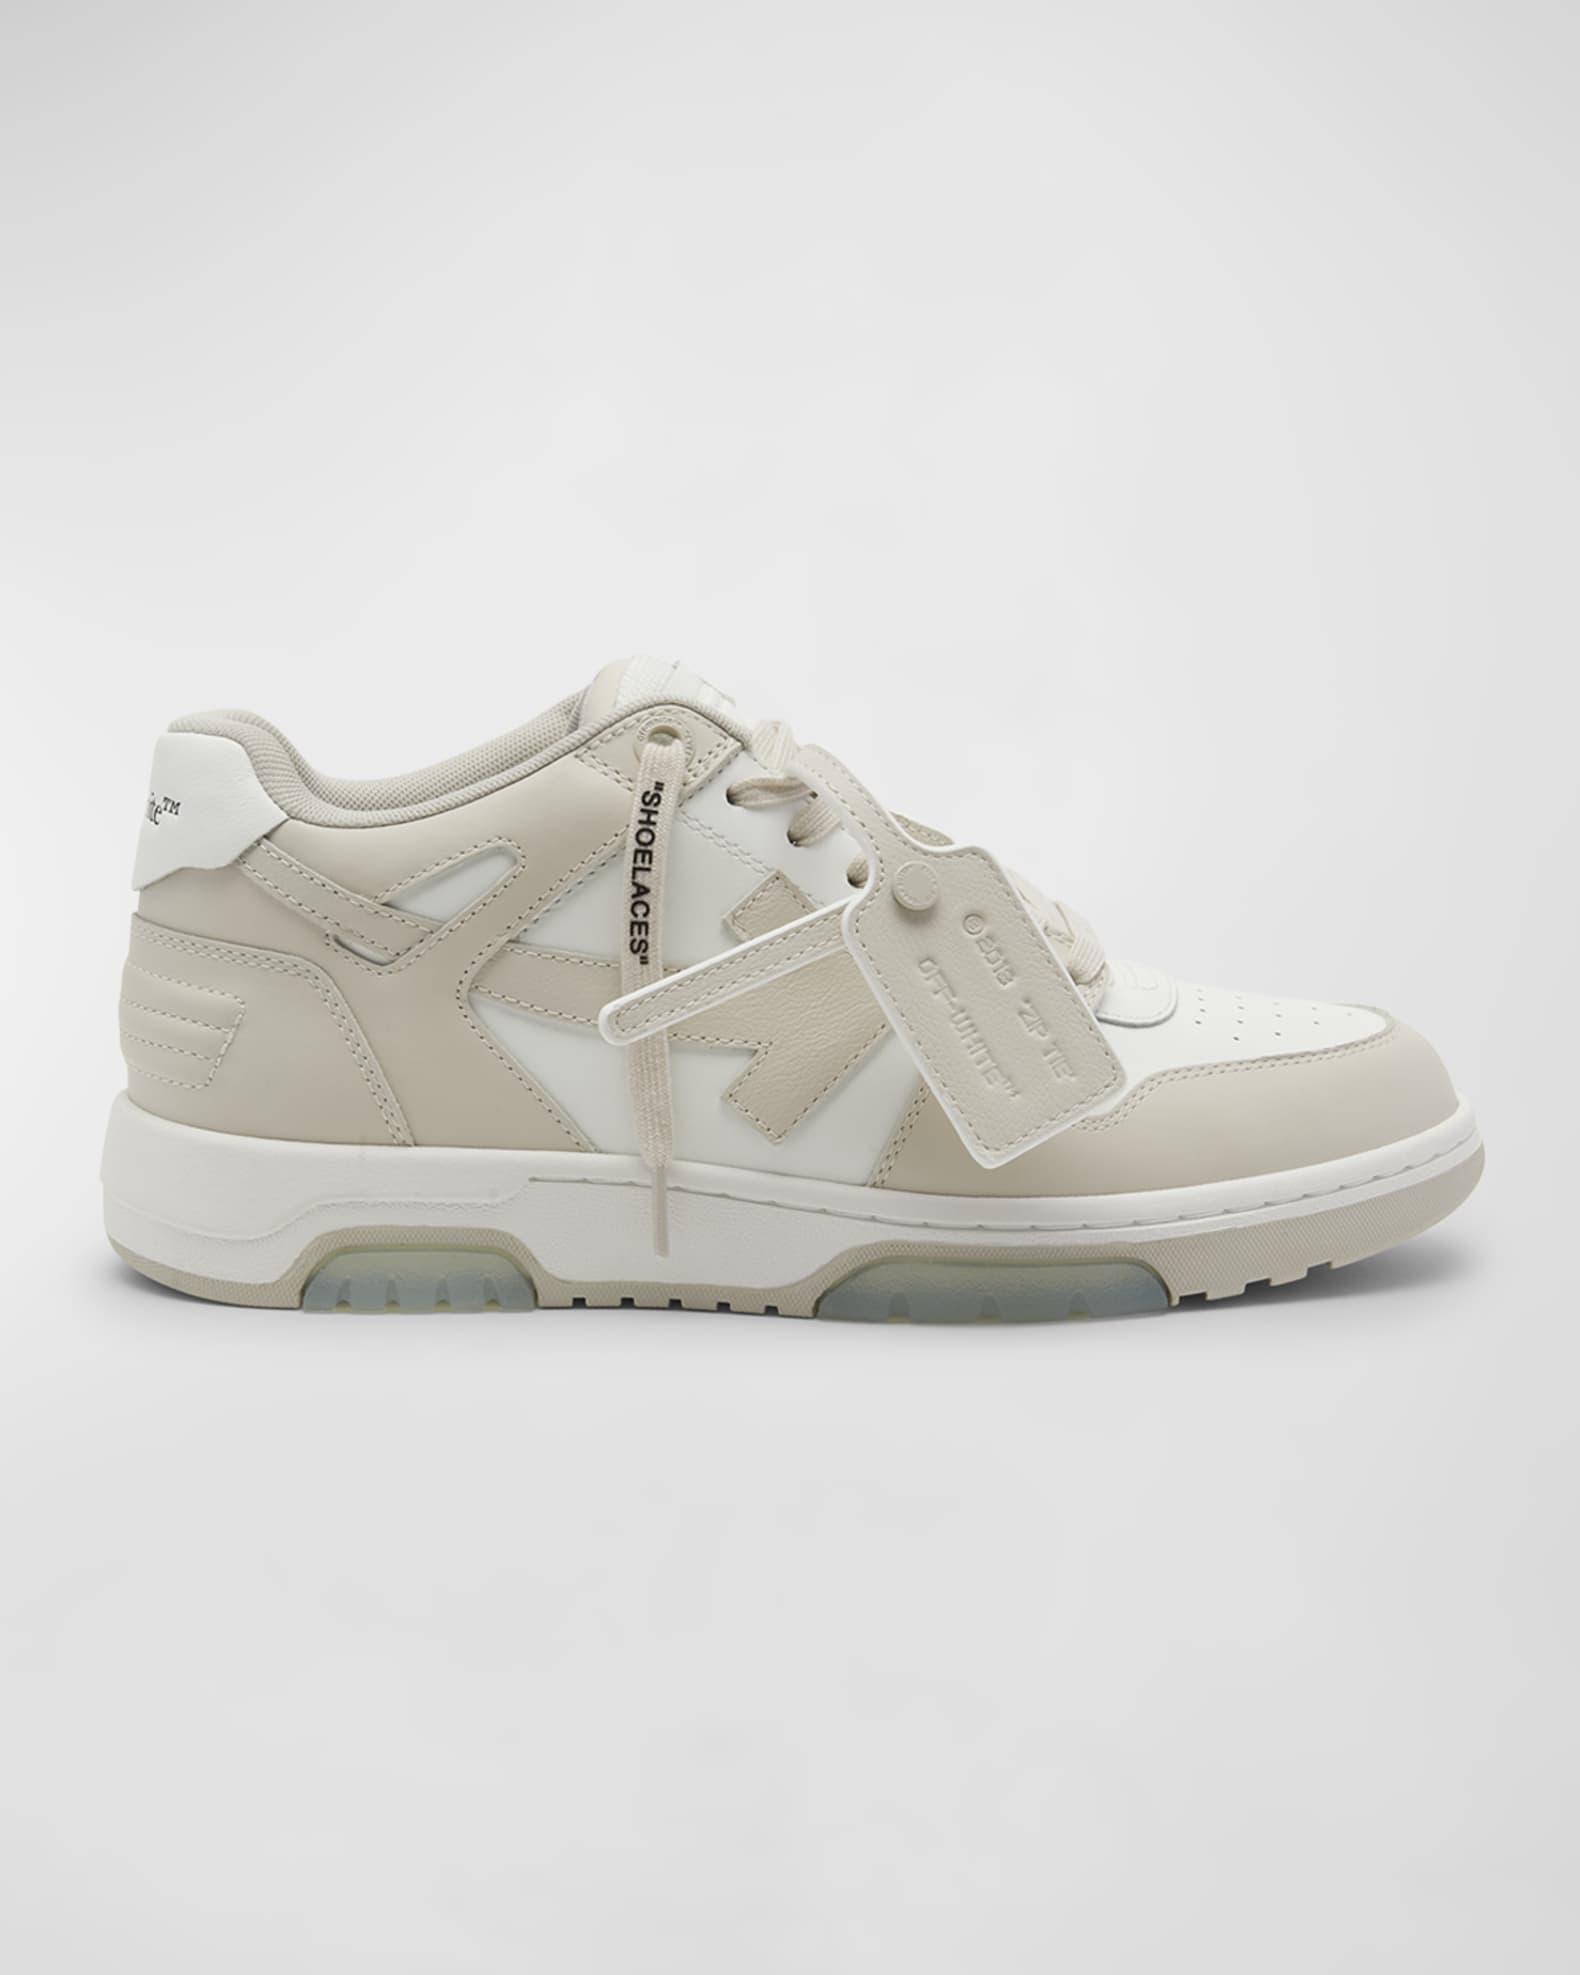 Off-White Out Of Office Arrow Bicolor Sneakers | Neiman Marcus